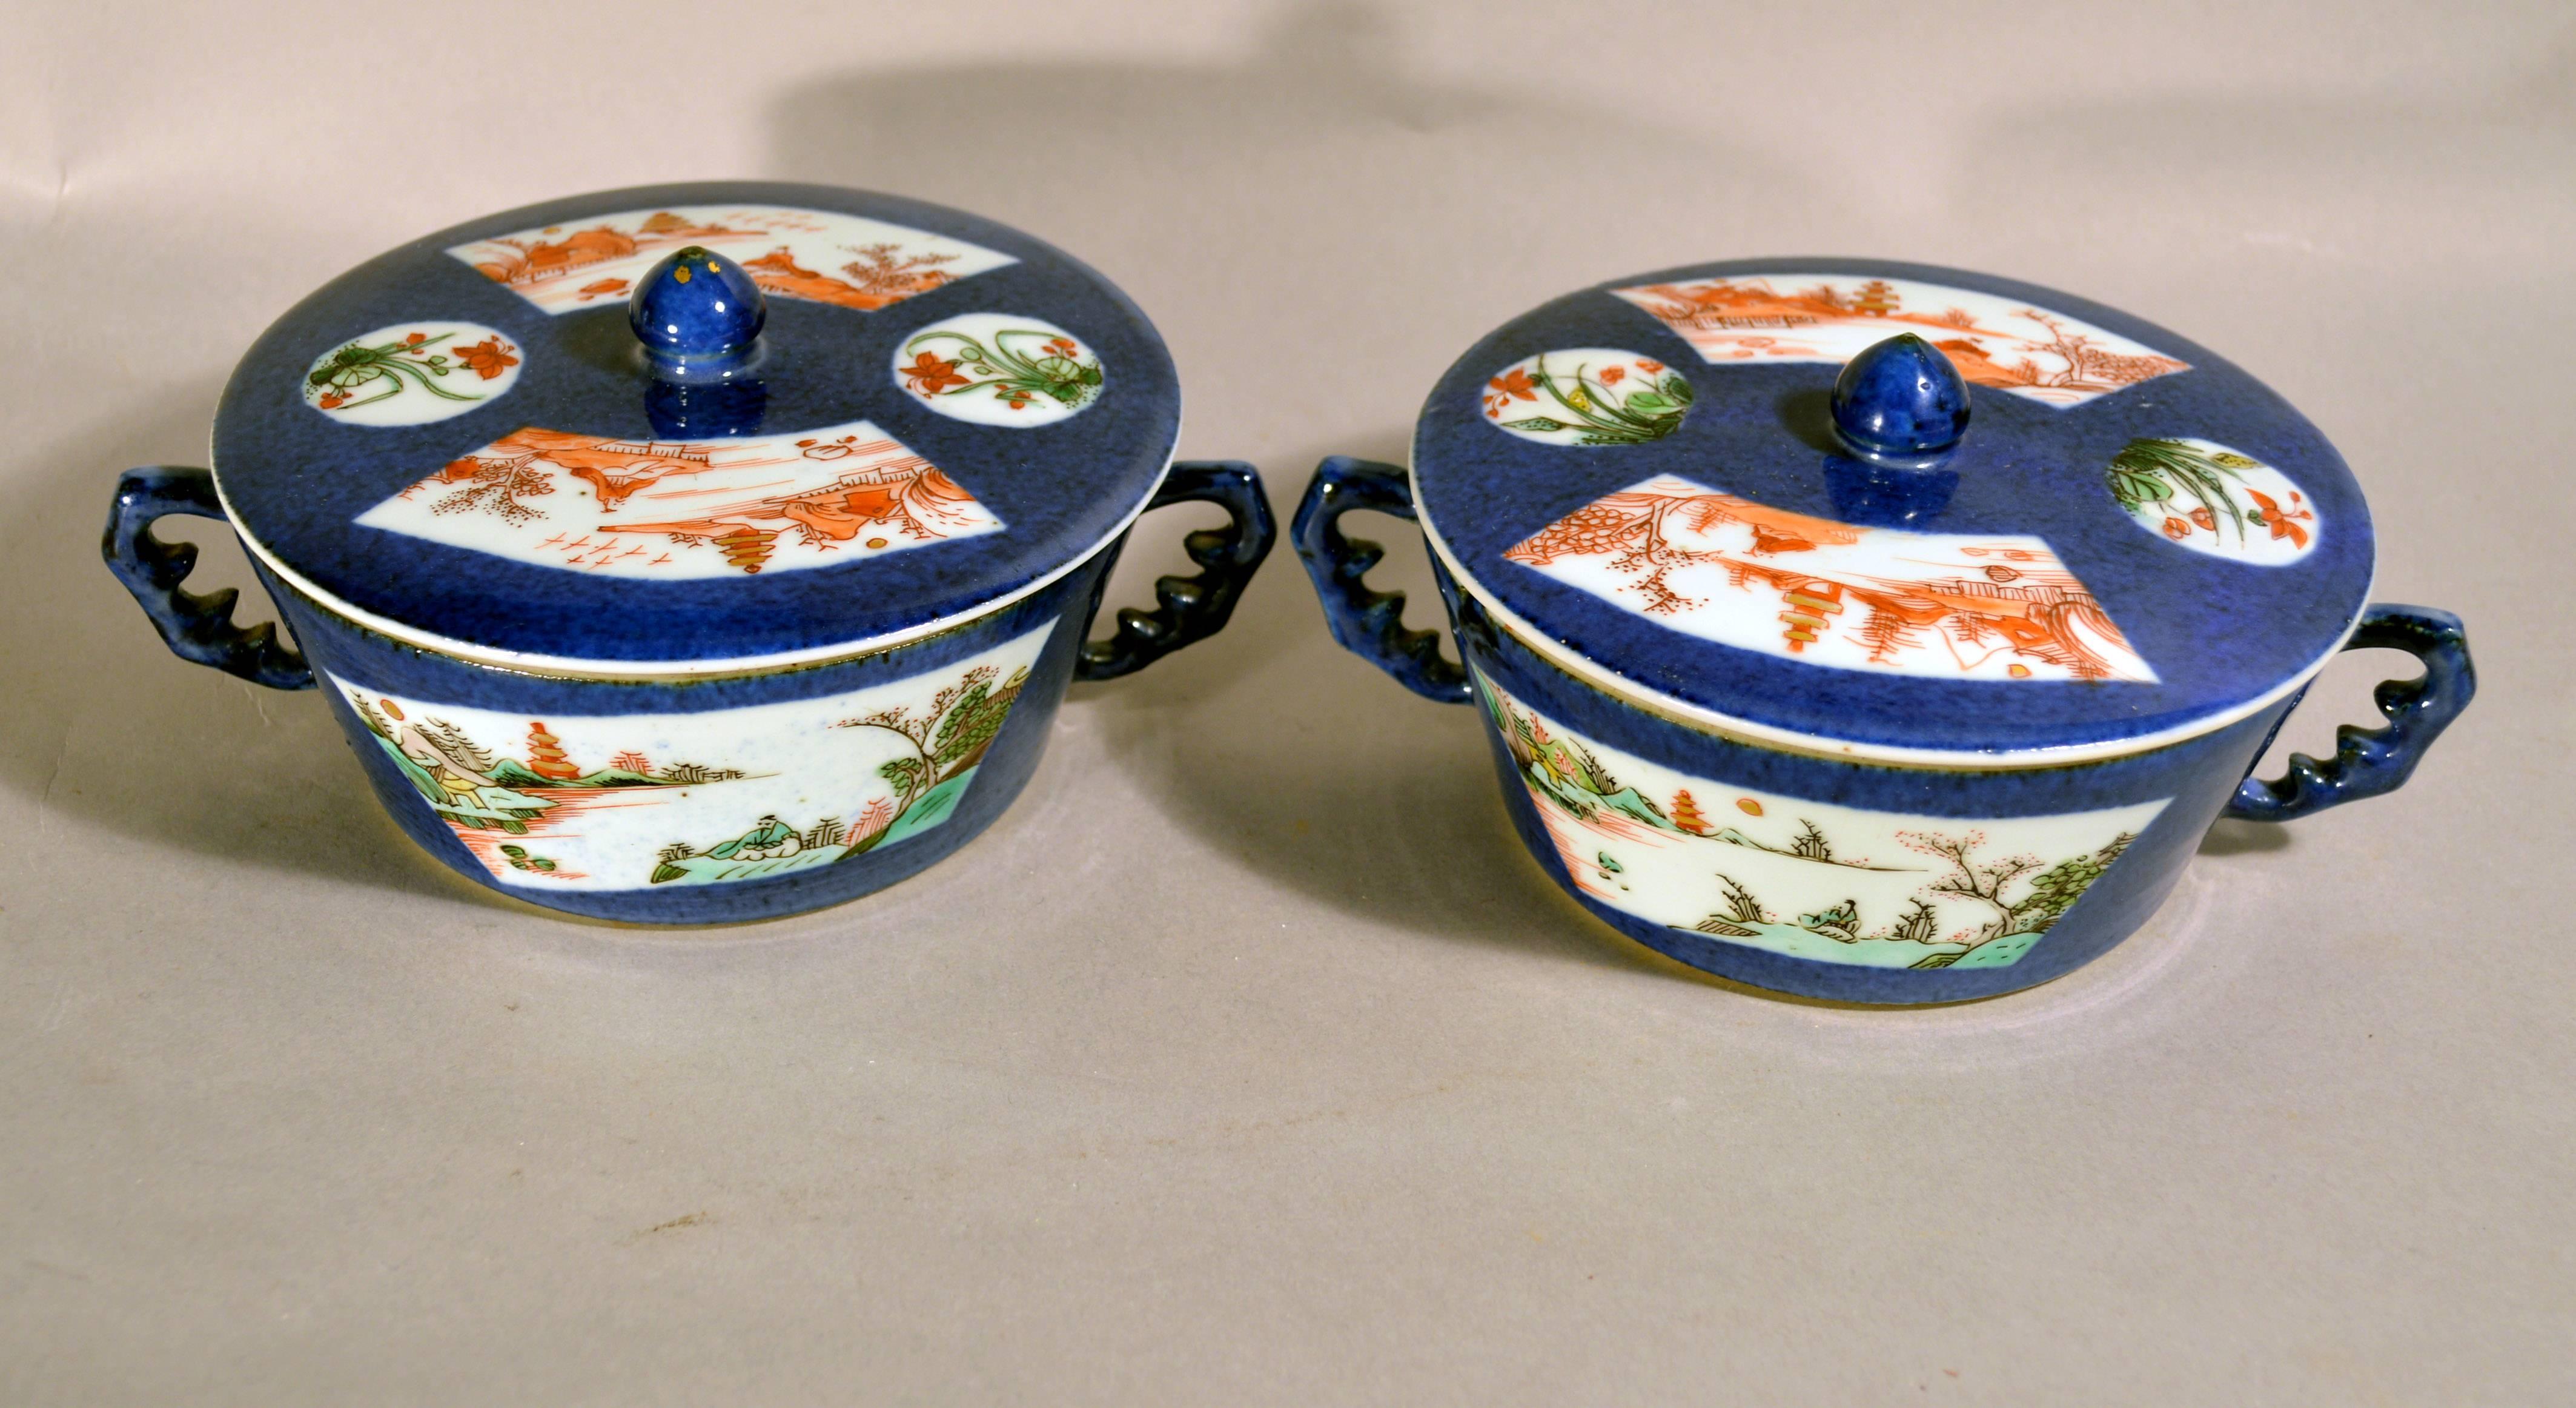 Chinese Export Famille Verte & Mazarine Blue Porcelain SauceTureens and Covers, 
Kangxi Period,
Circa 1720.

The Chinese porcelain circular butter tubs and covers have a mazarine blue ground with fan-shaped panels with famille verte decoration